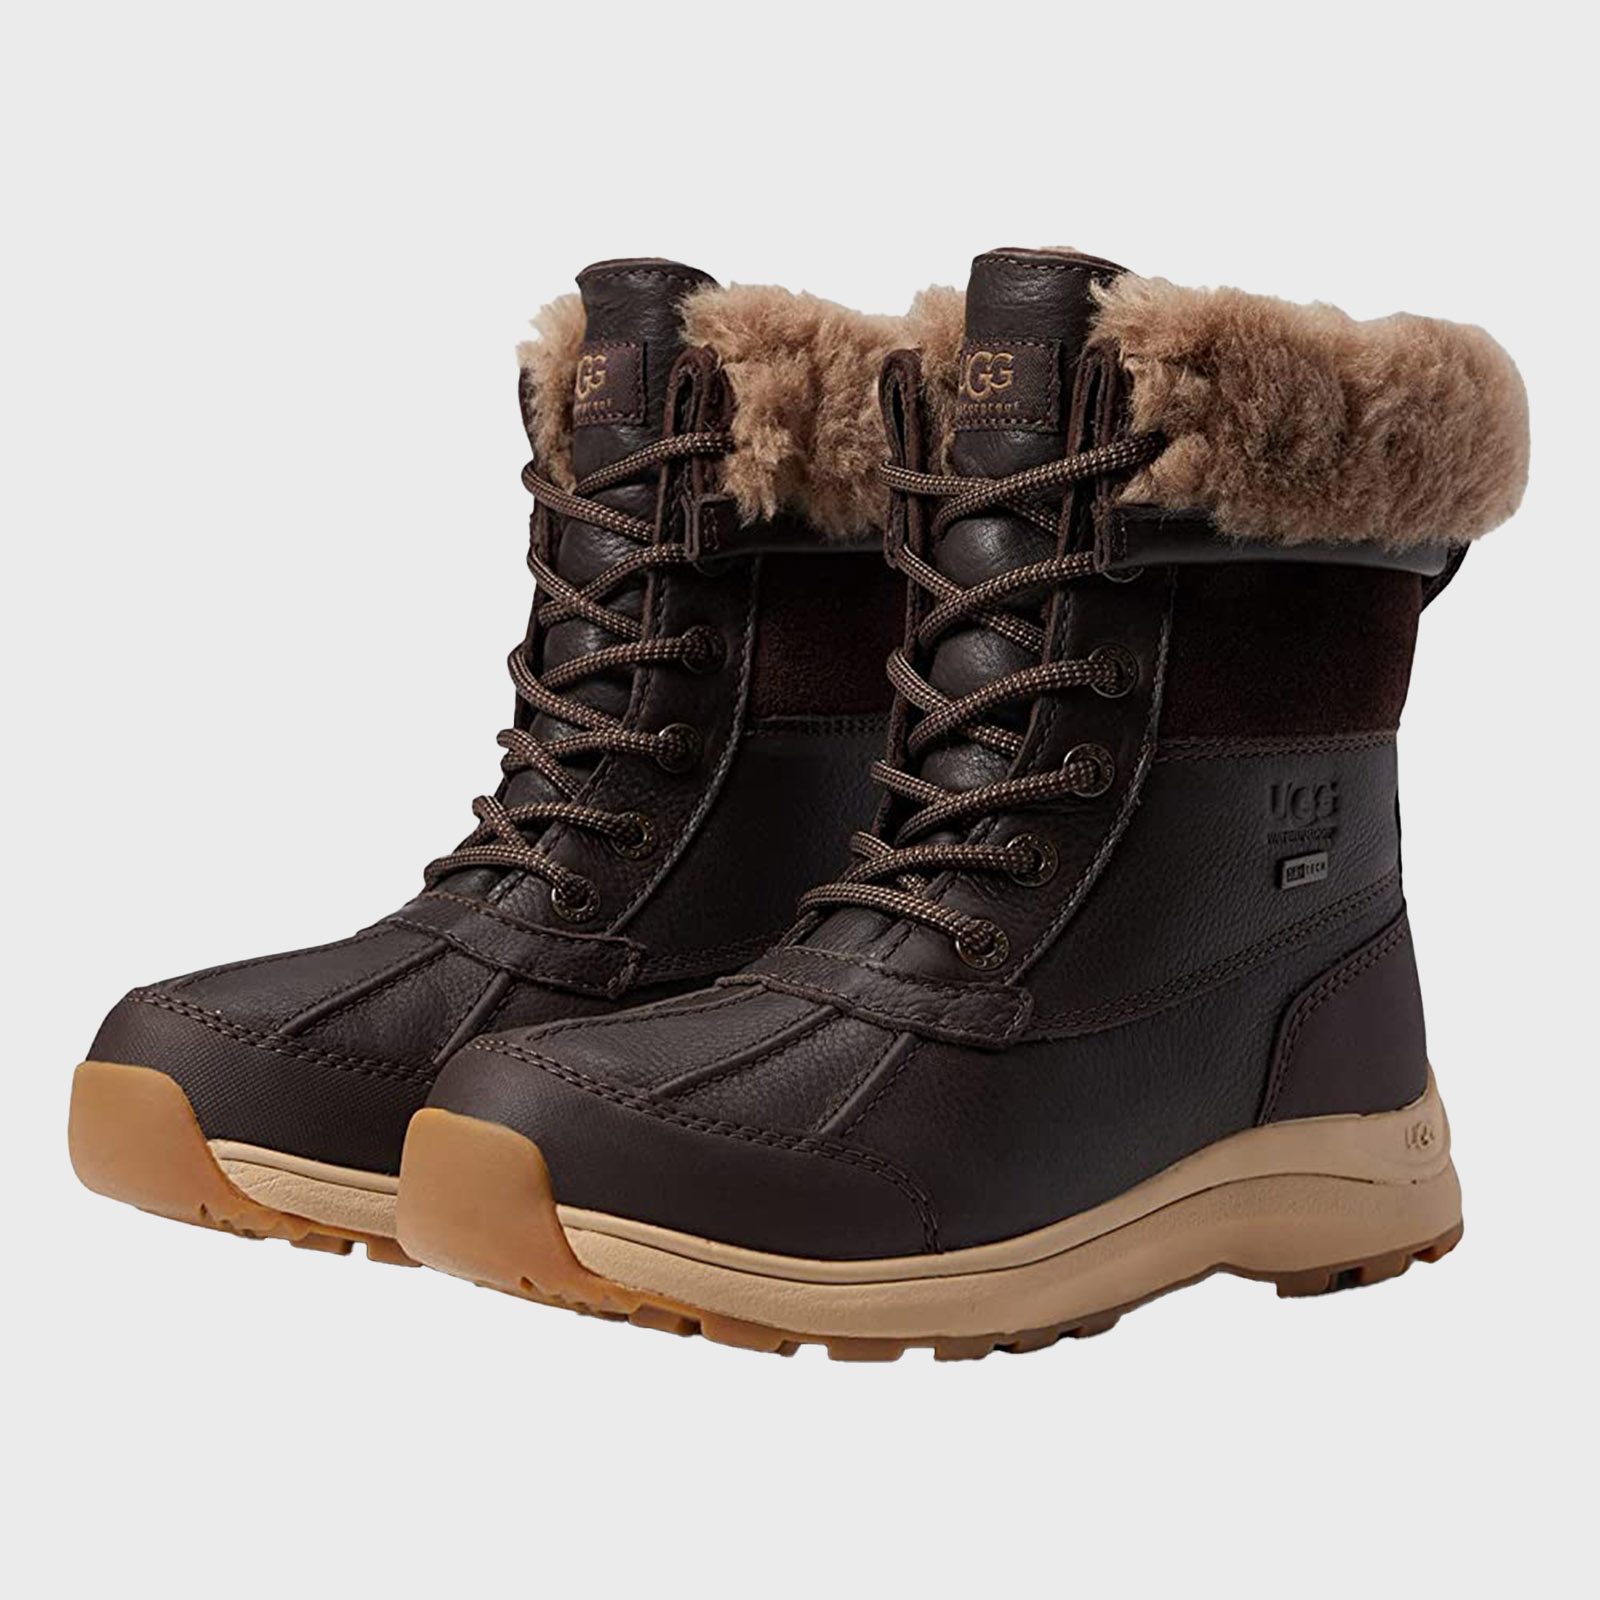 15 Best Zappos Boots for Winter 2022 | Winter Boots for the Whole Family